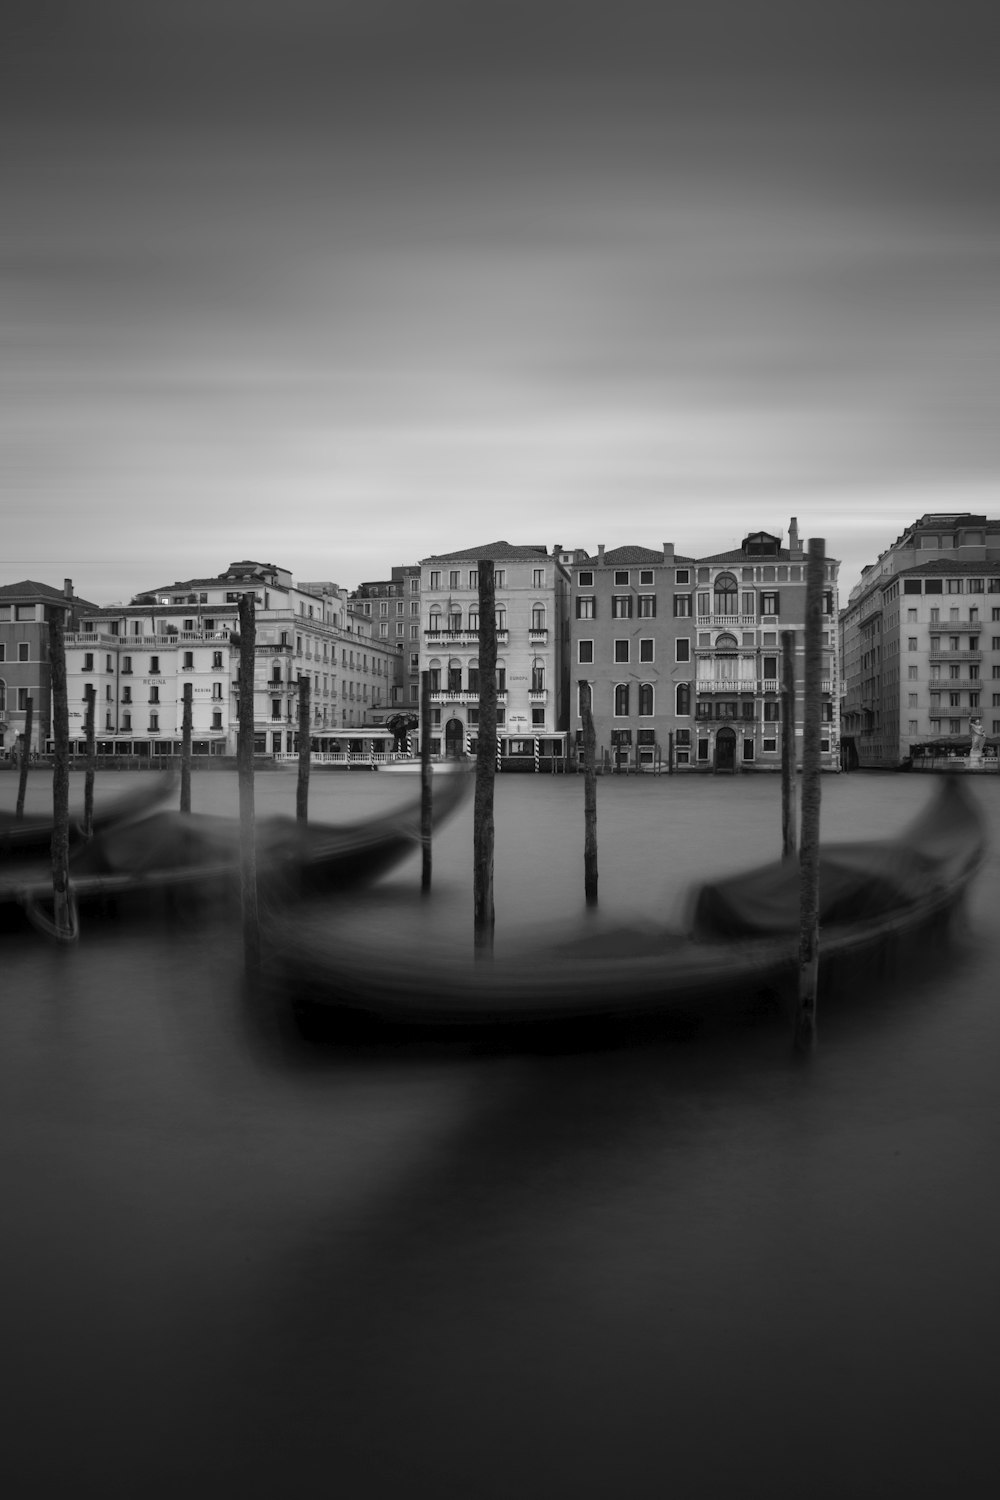 grayscale photography of two canoe in front of city buildings